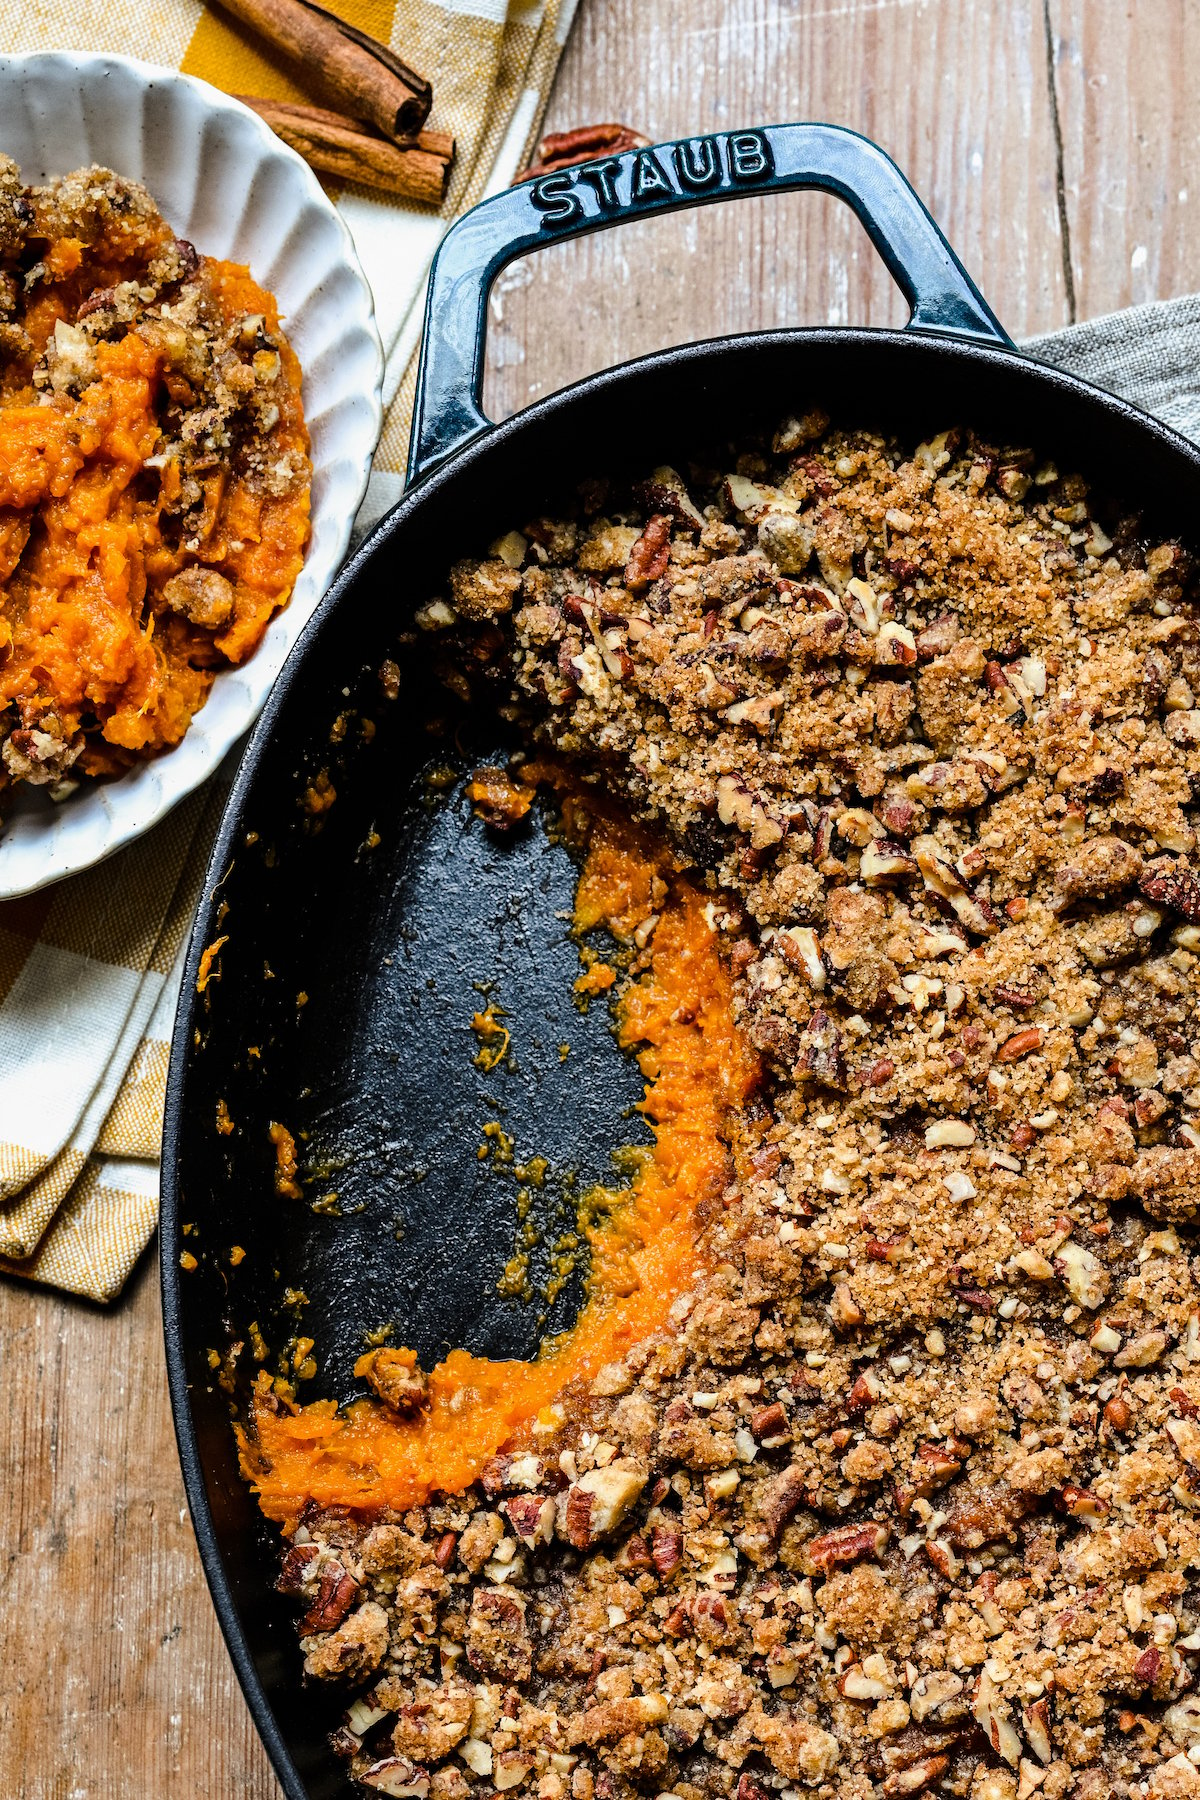 A sweet potato casserole with a serving scooped out and placed on a small plate.